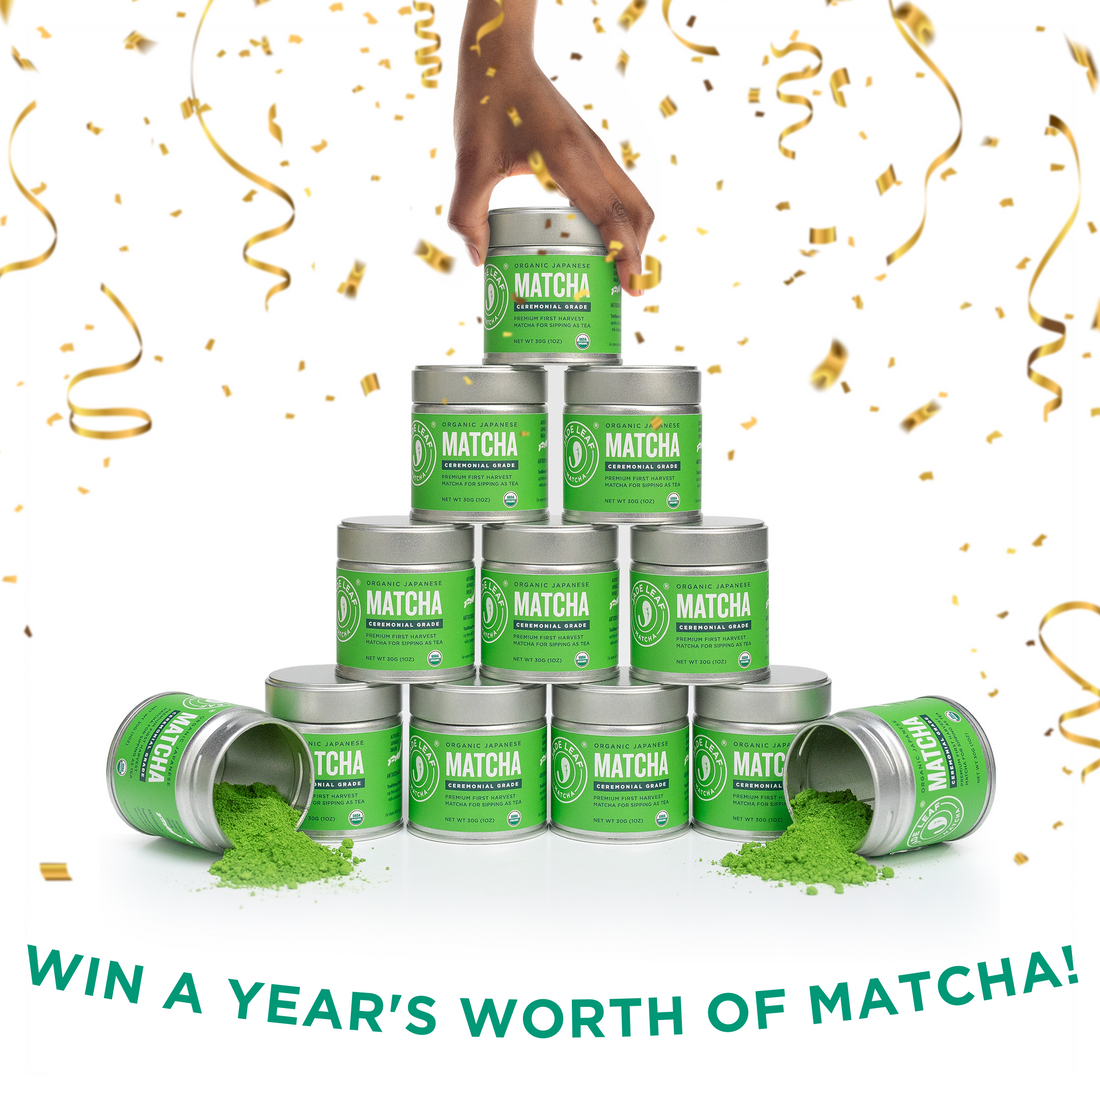 GIVEAWAY: Win A Year's Worth of Matcha!!